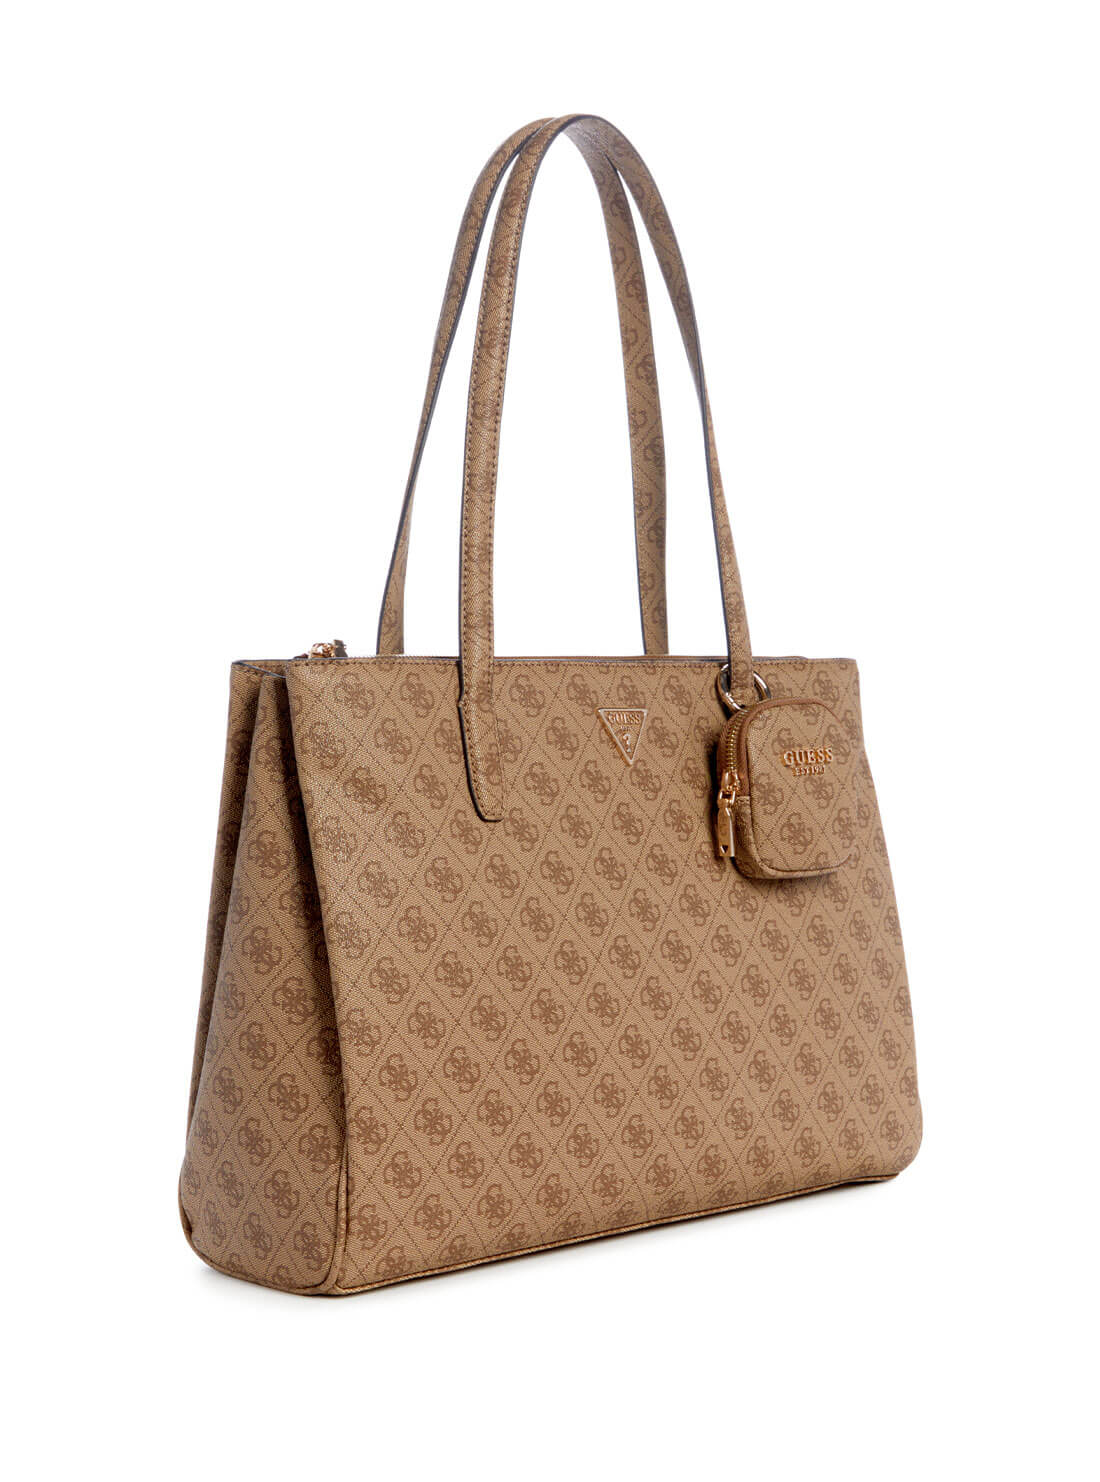 GUESS Beige Brown Logo Power Play Tote Bag side view